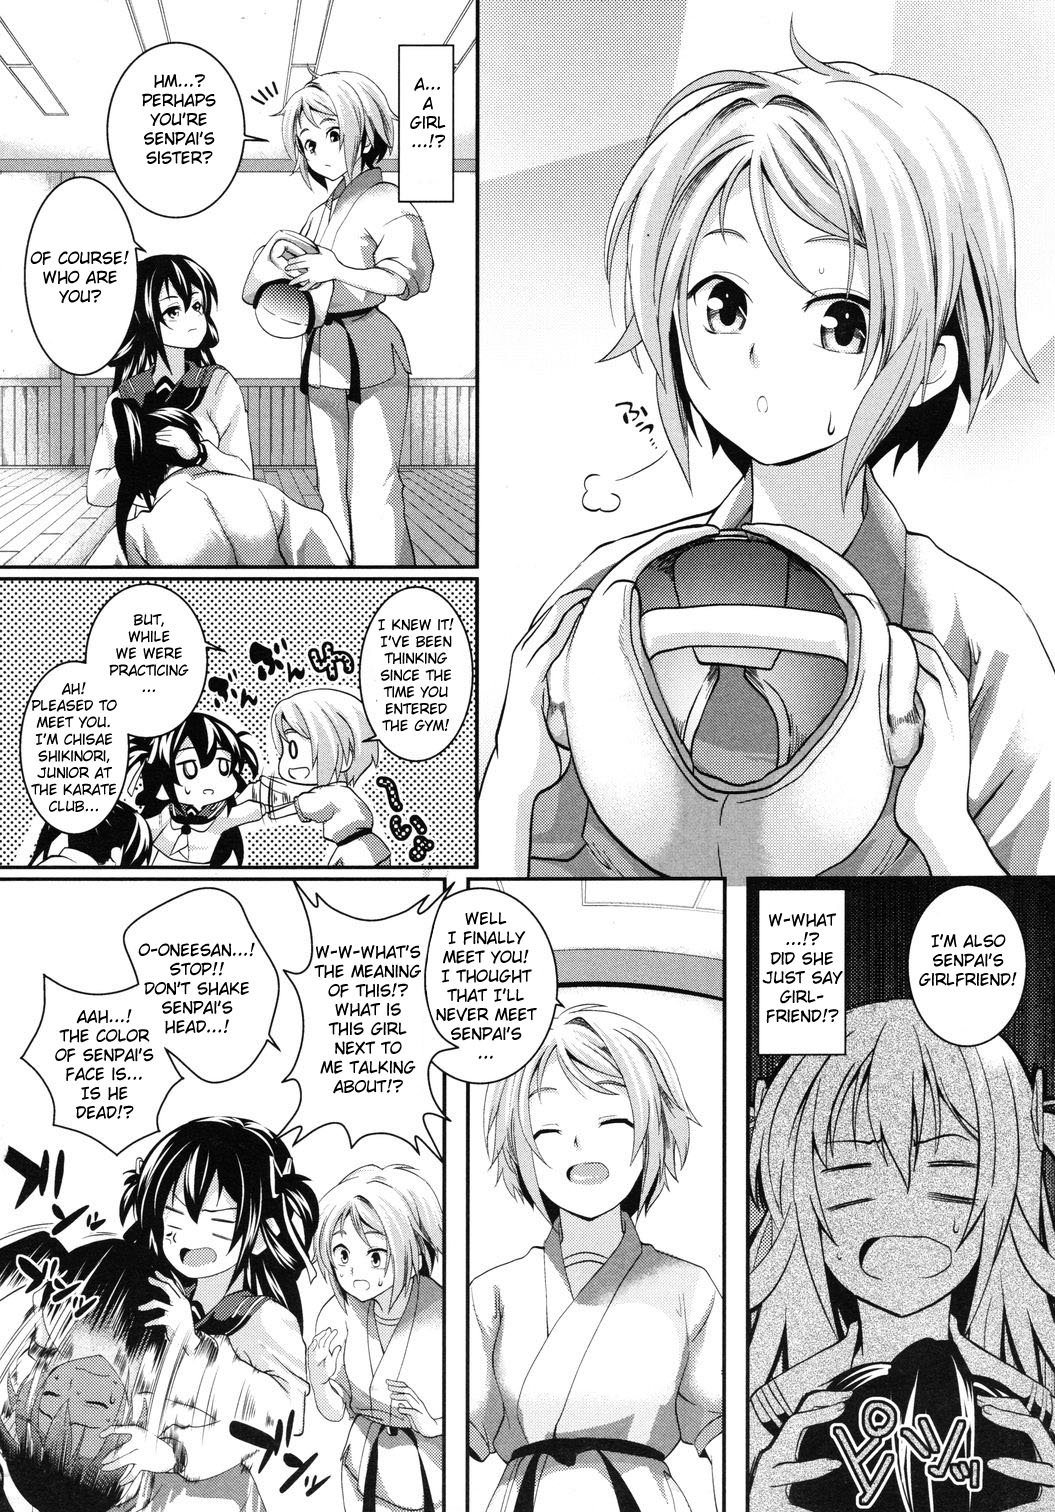 [soba] Tsukushite♪Amaete♪ | Hold Me, Fawn on Me Ch. 1-2 [English] {doujin-moe.us} page 4 full